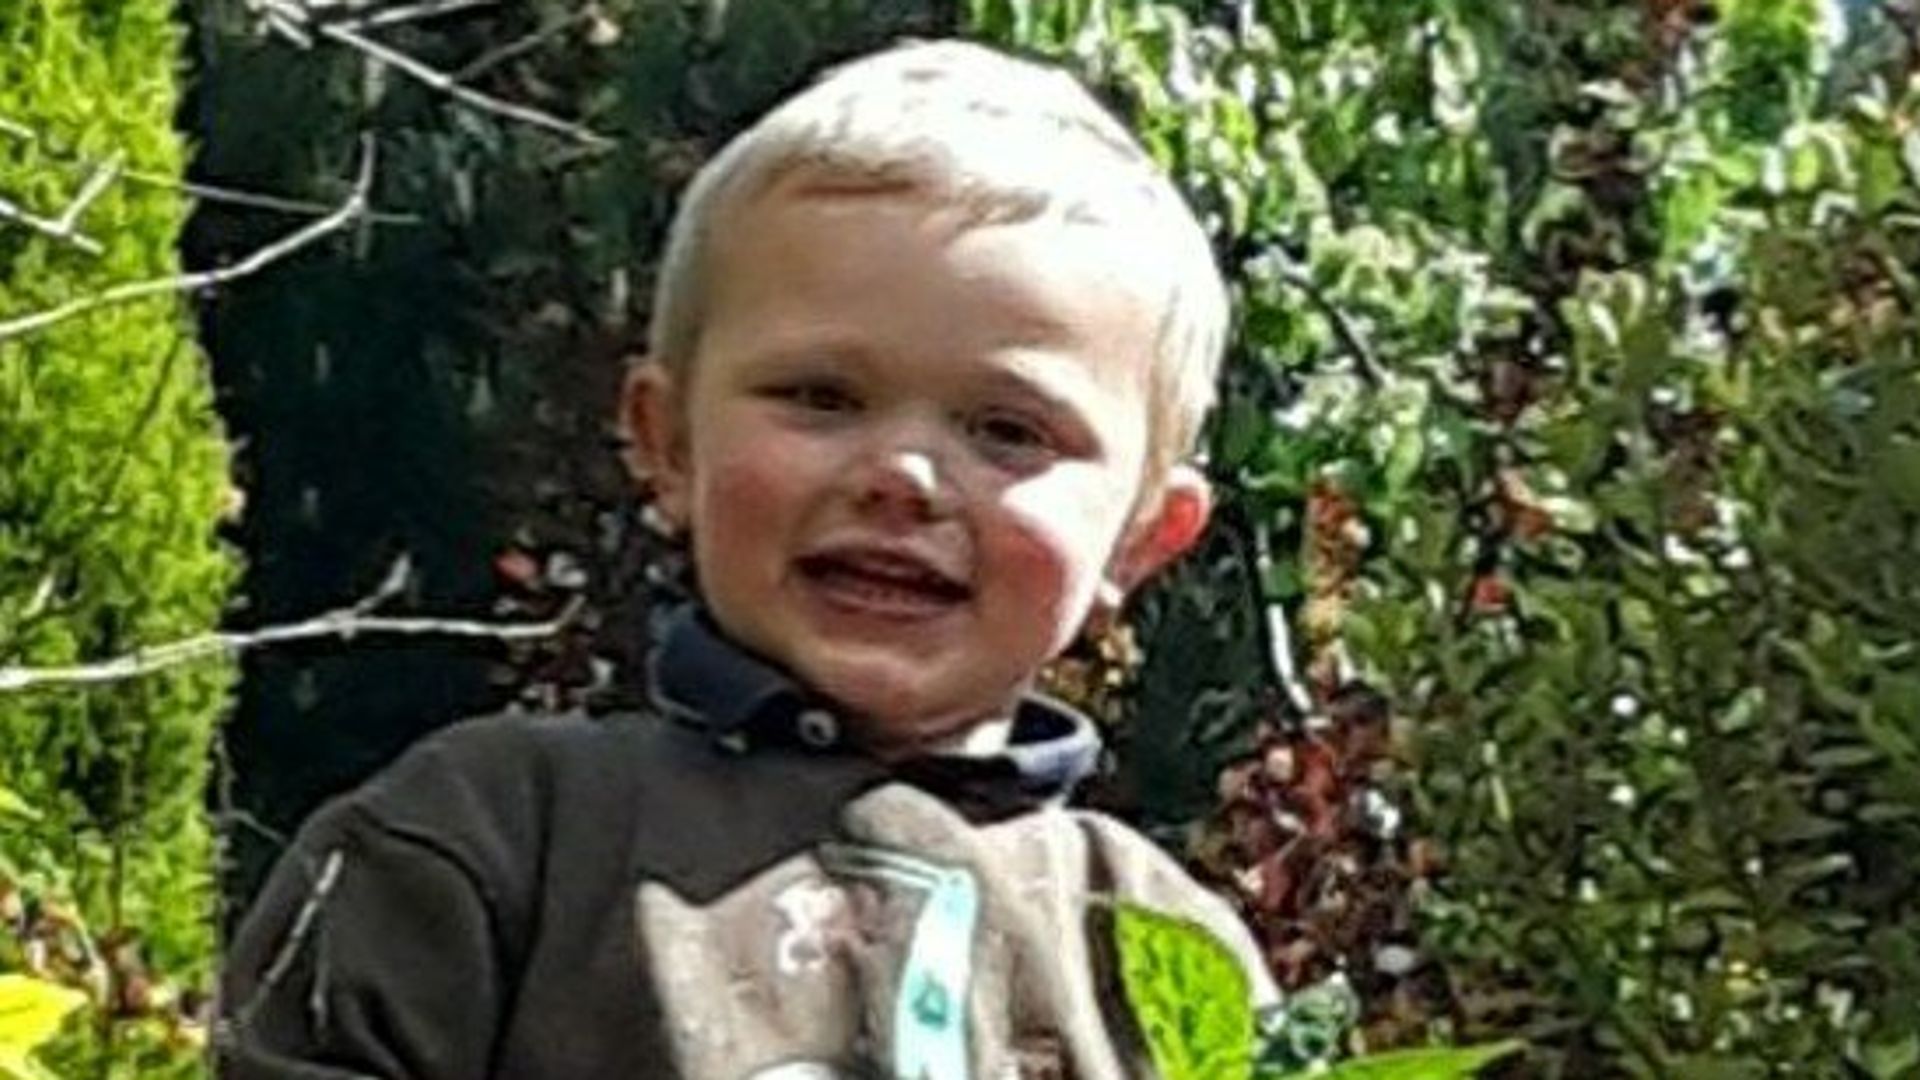 Two people charged over three-year-old's death after dog attack 